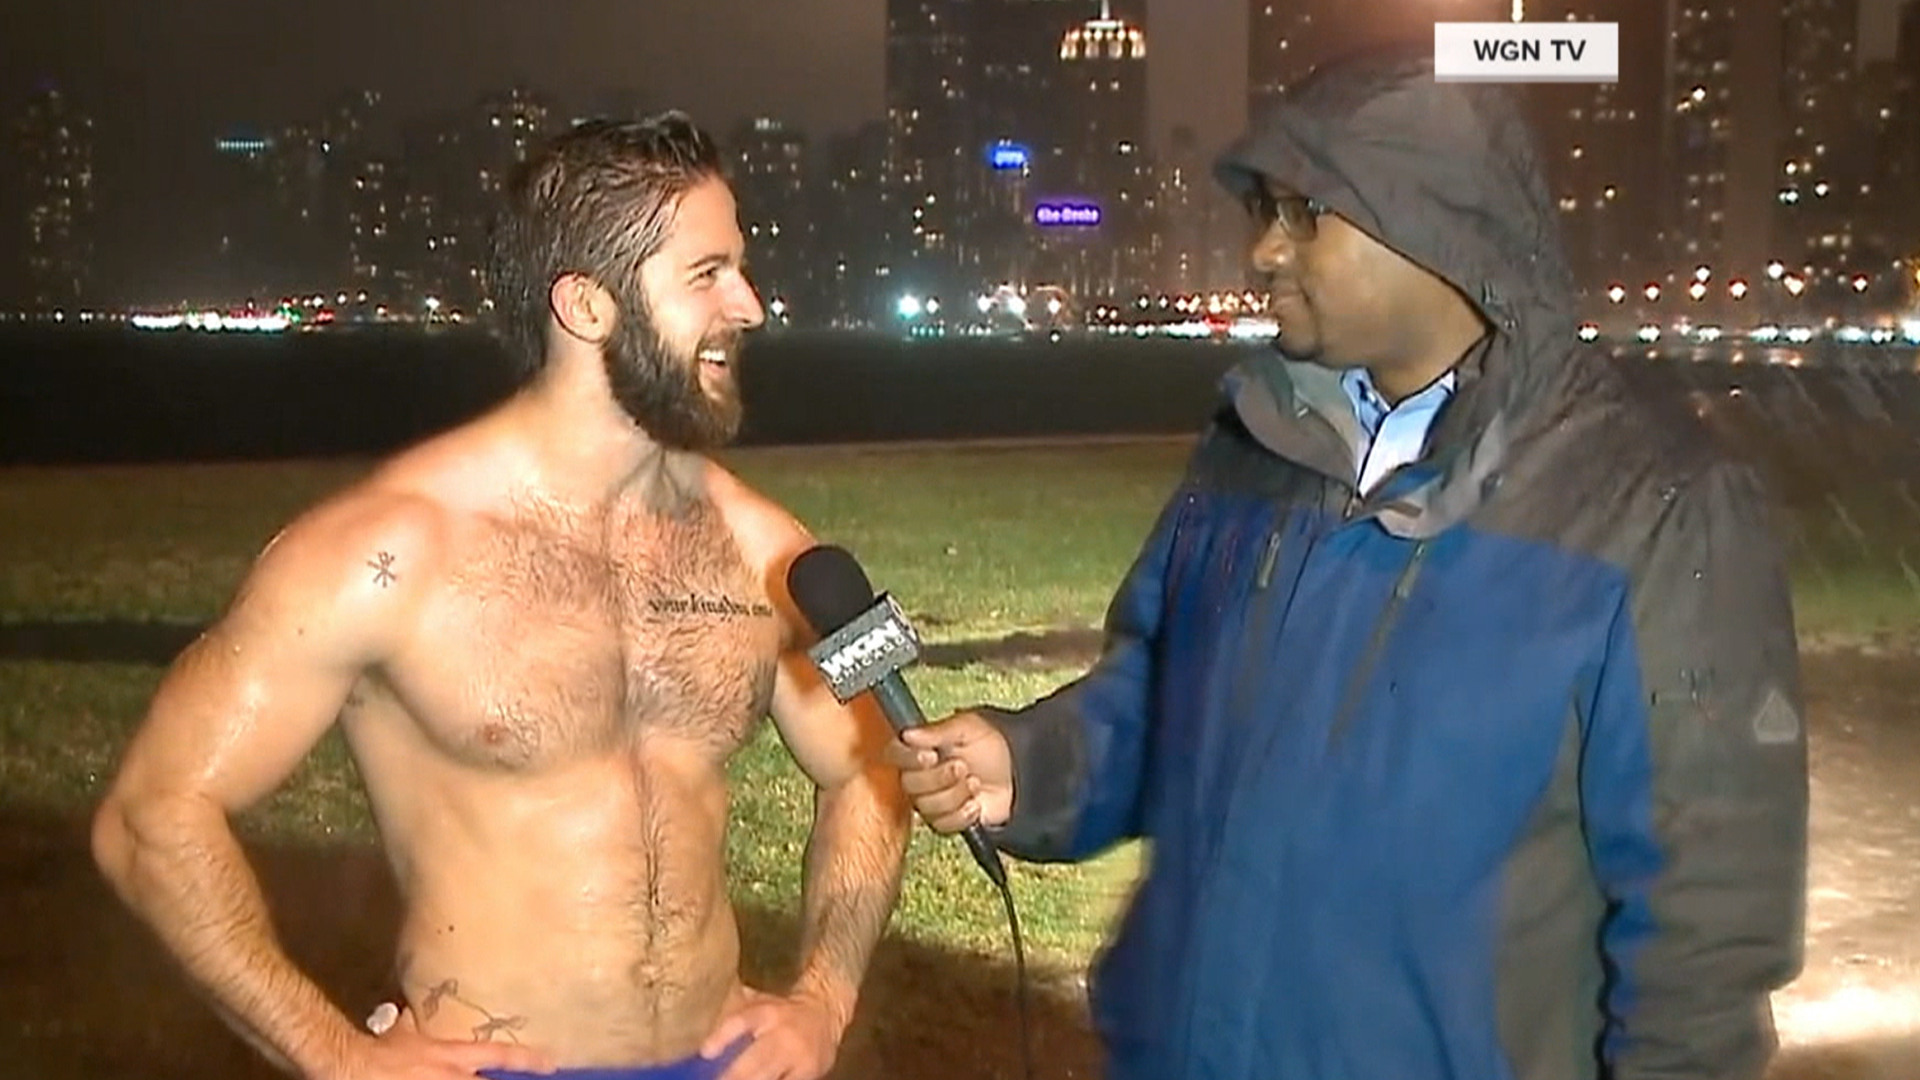 Guy running shirtless in Chicago announces he’s single, goes viral - NBC News